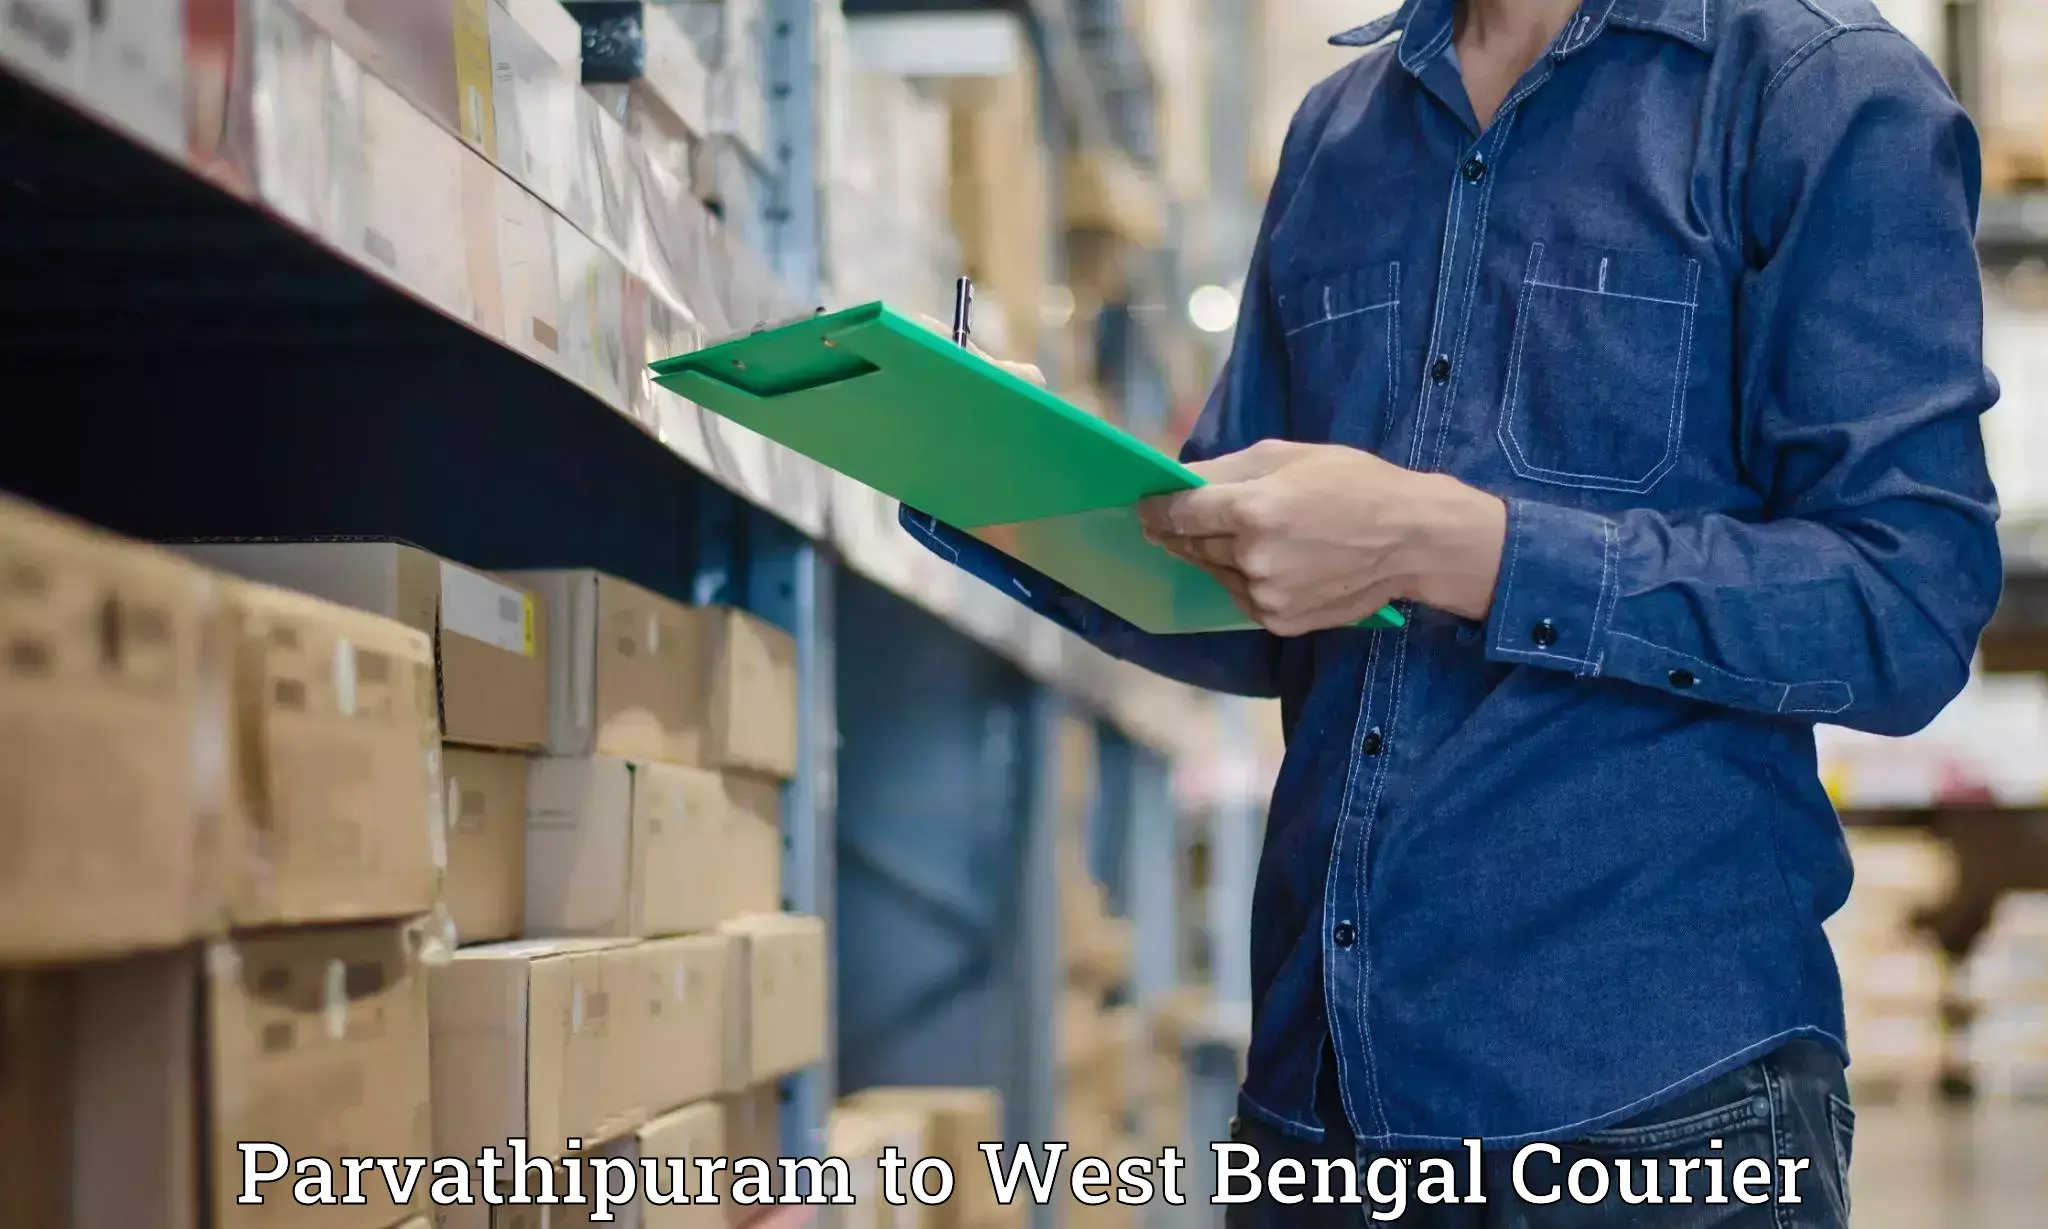 Business delivery service Parvathipuram to West Bengal